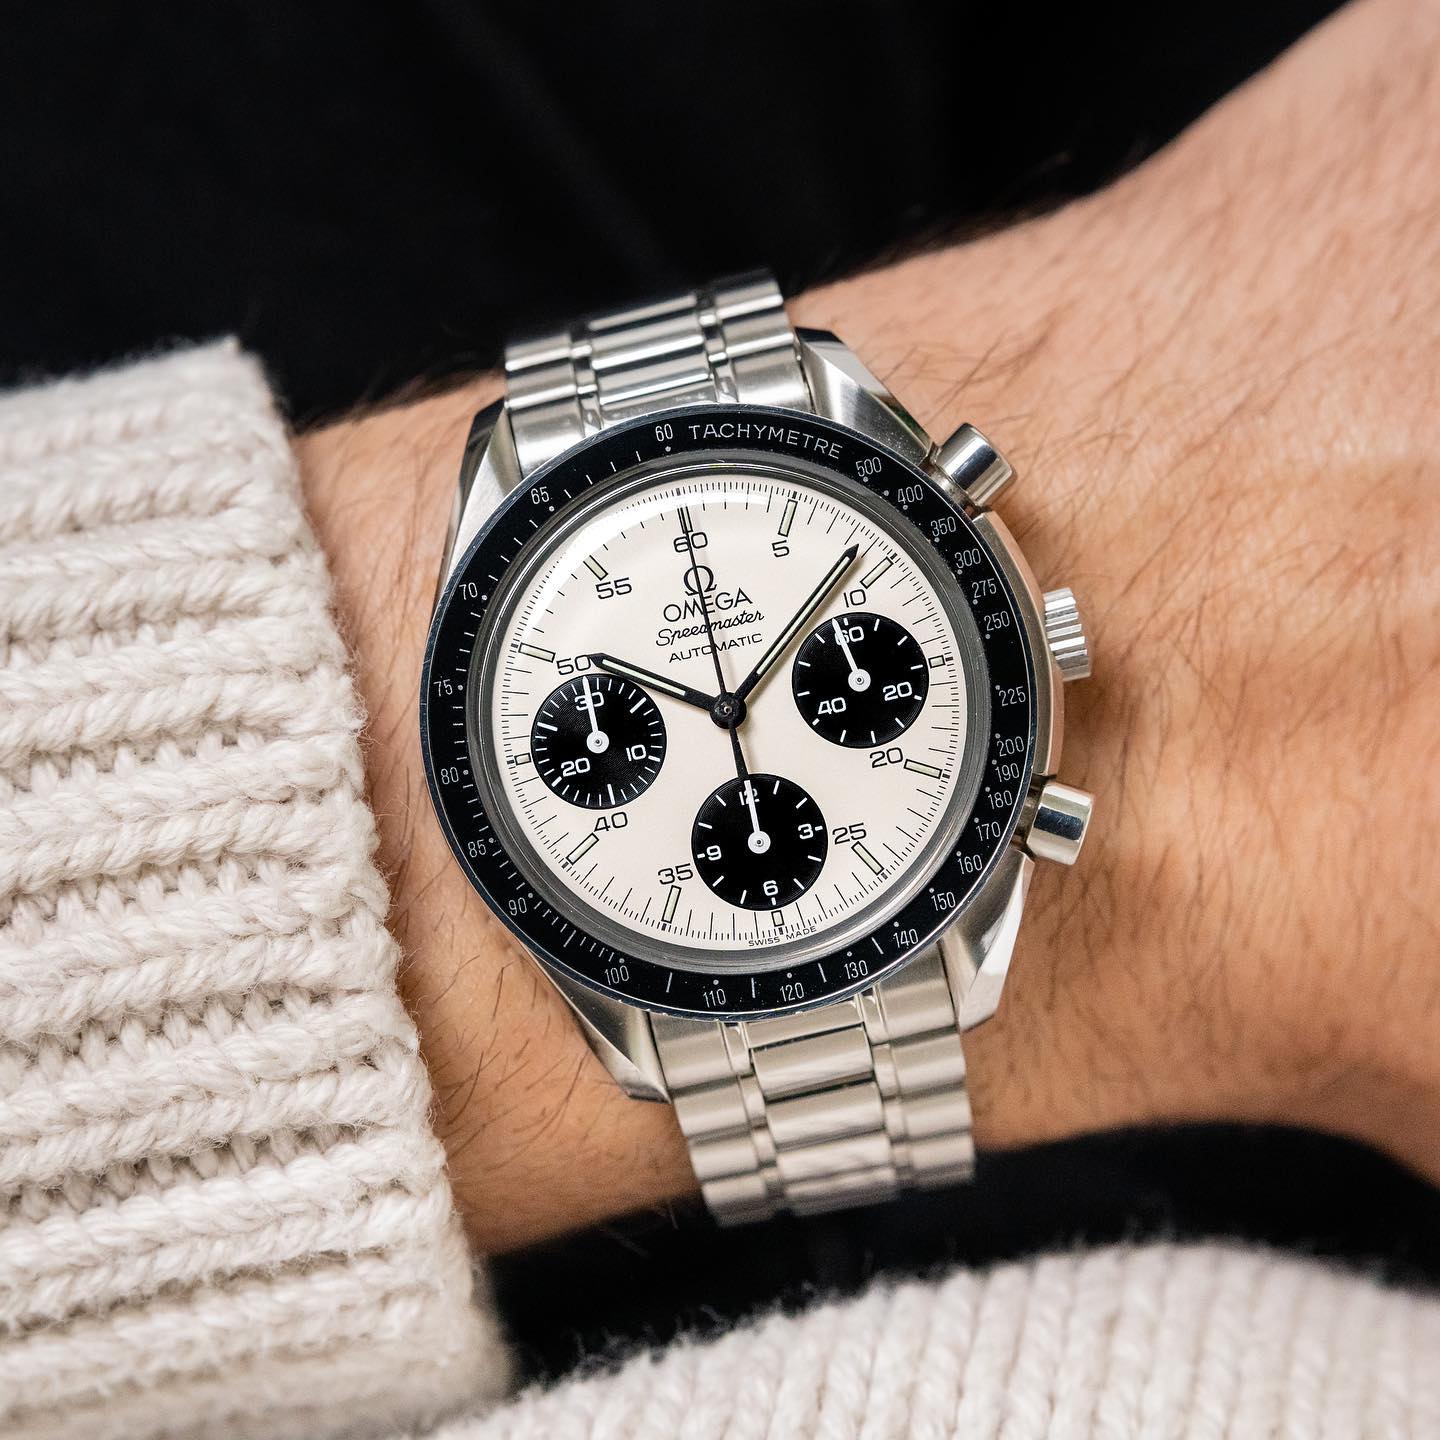 Special edition for Marui, a Japanese department store. White dial with 5 minute increments on the indices and black sub-dials (“panda dial”). Omega Speedmaster Reduced 3510.2